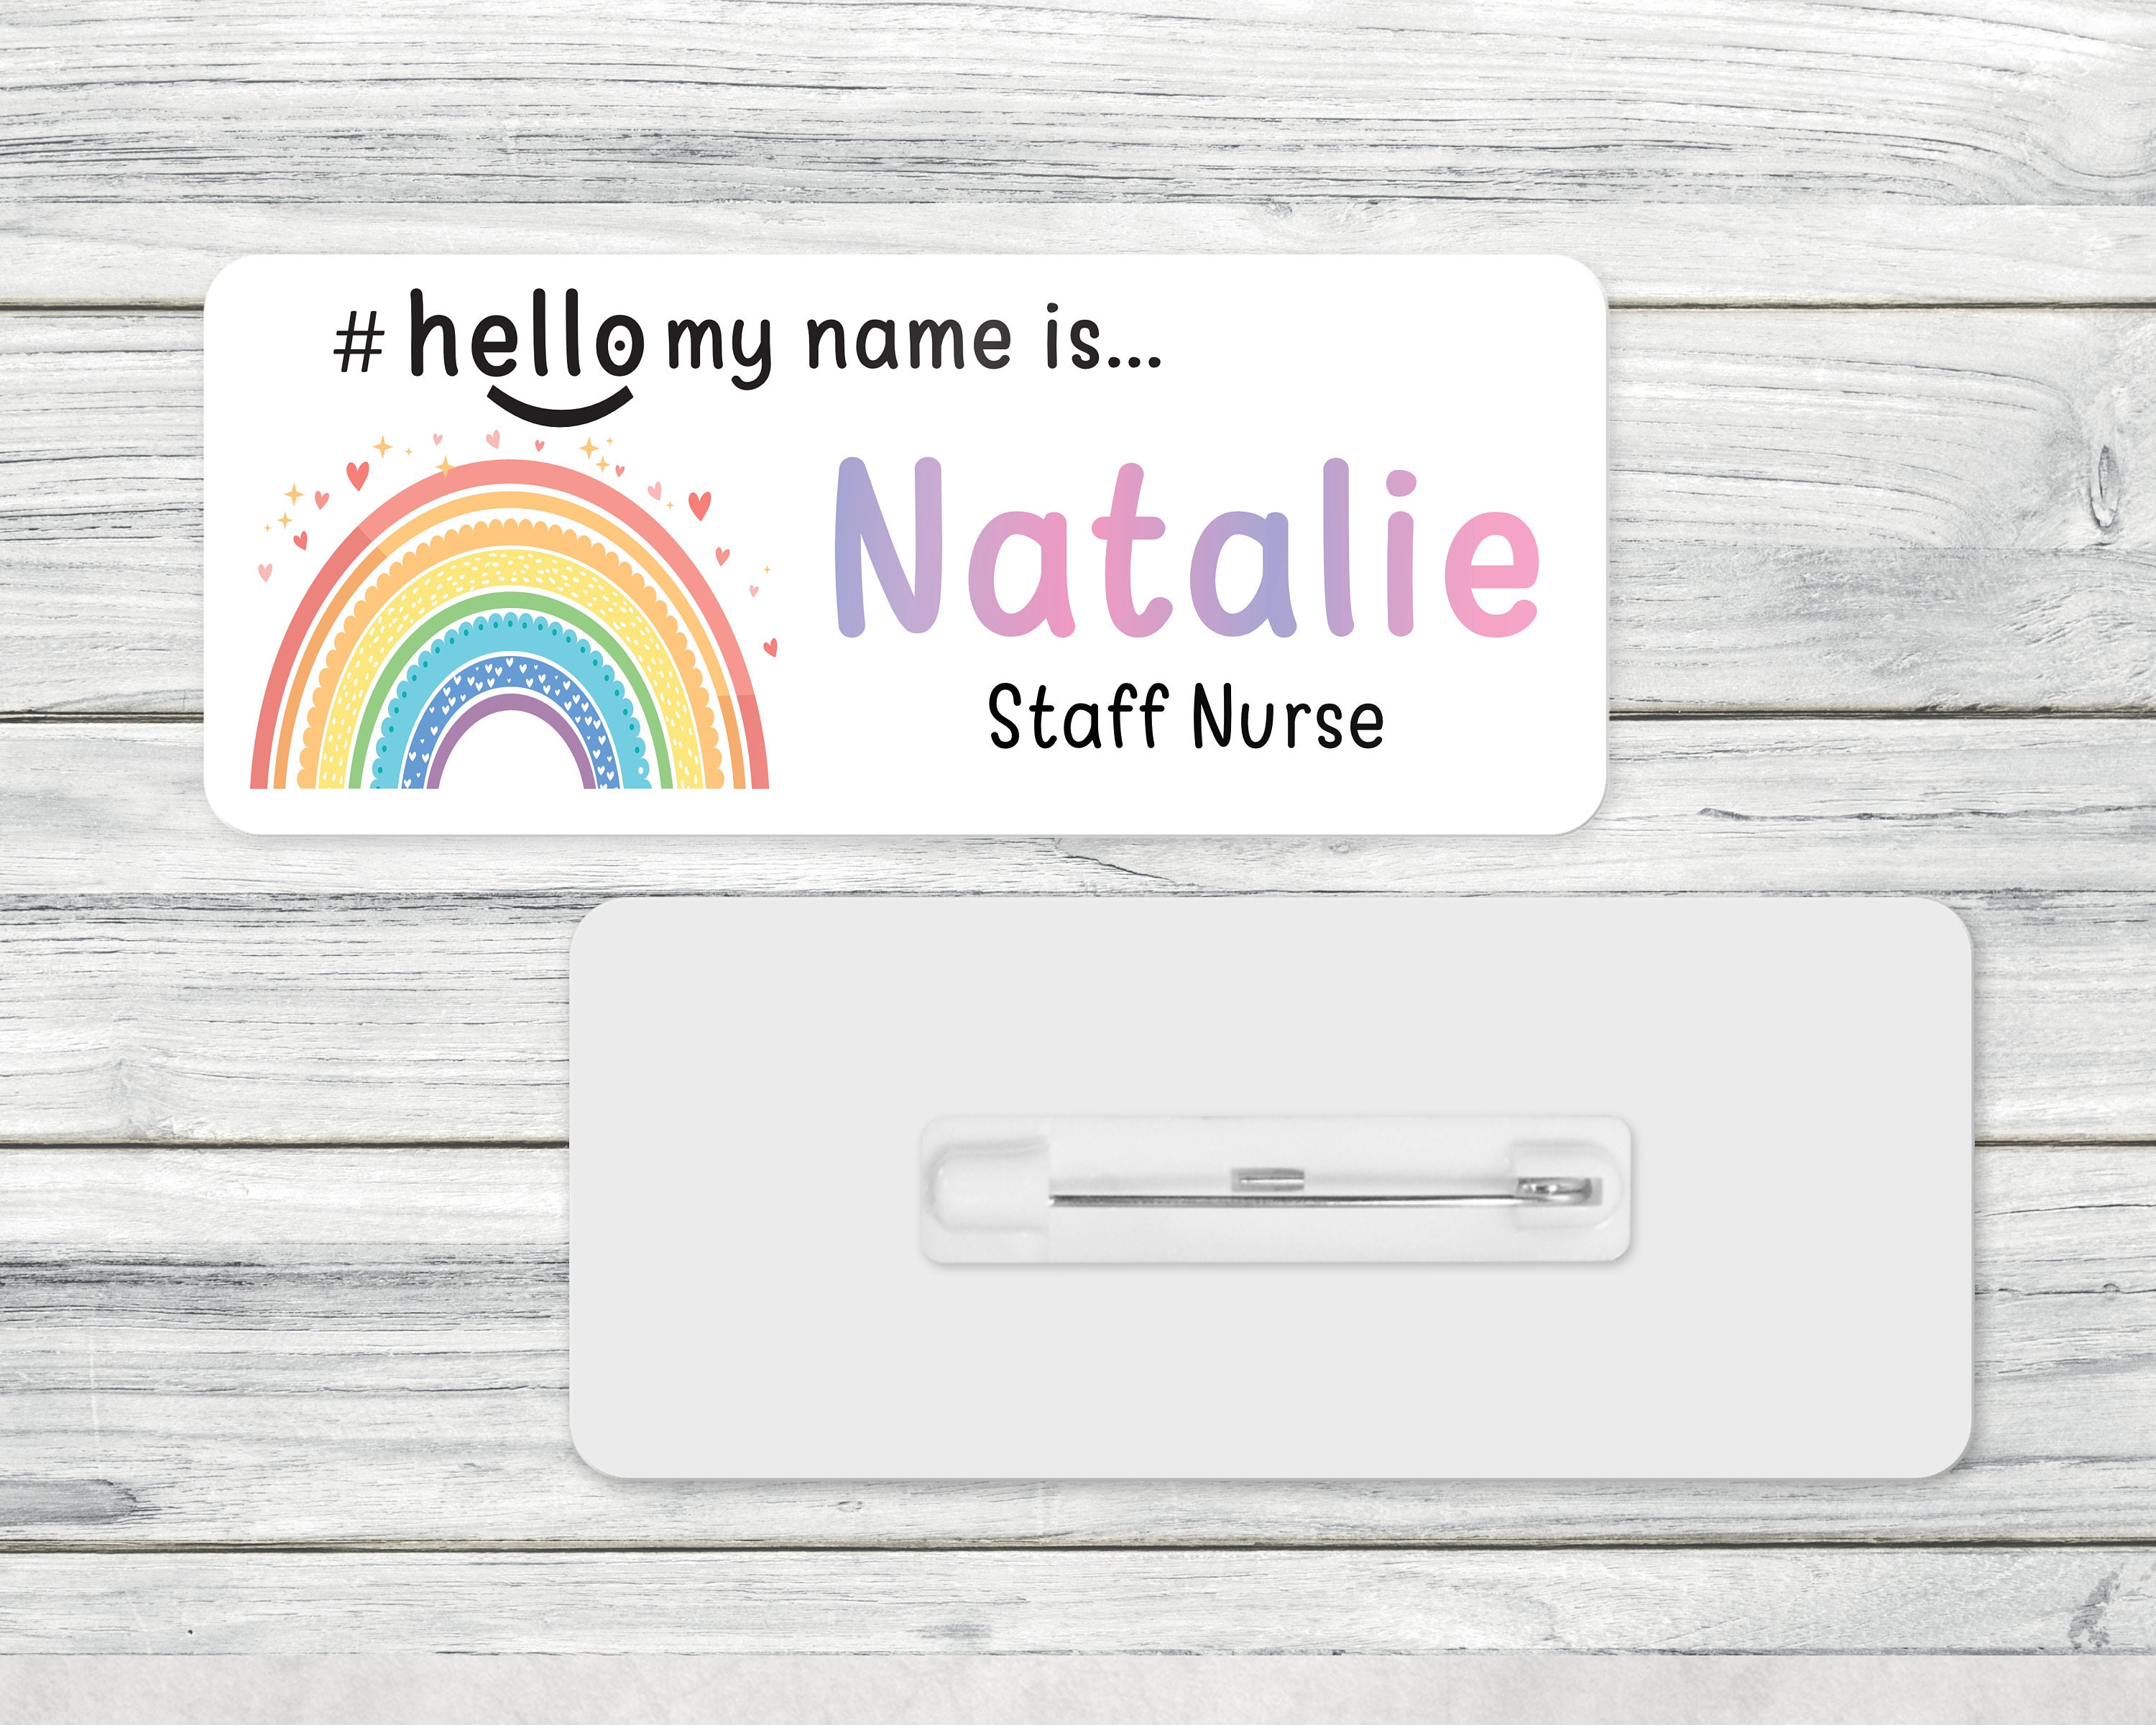 Engraved Hello my name is badges Student Nurse Health Care Assistant Hospital 